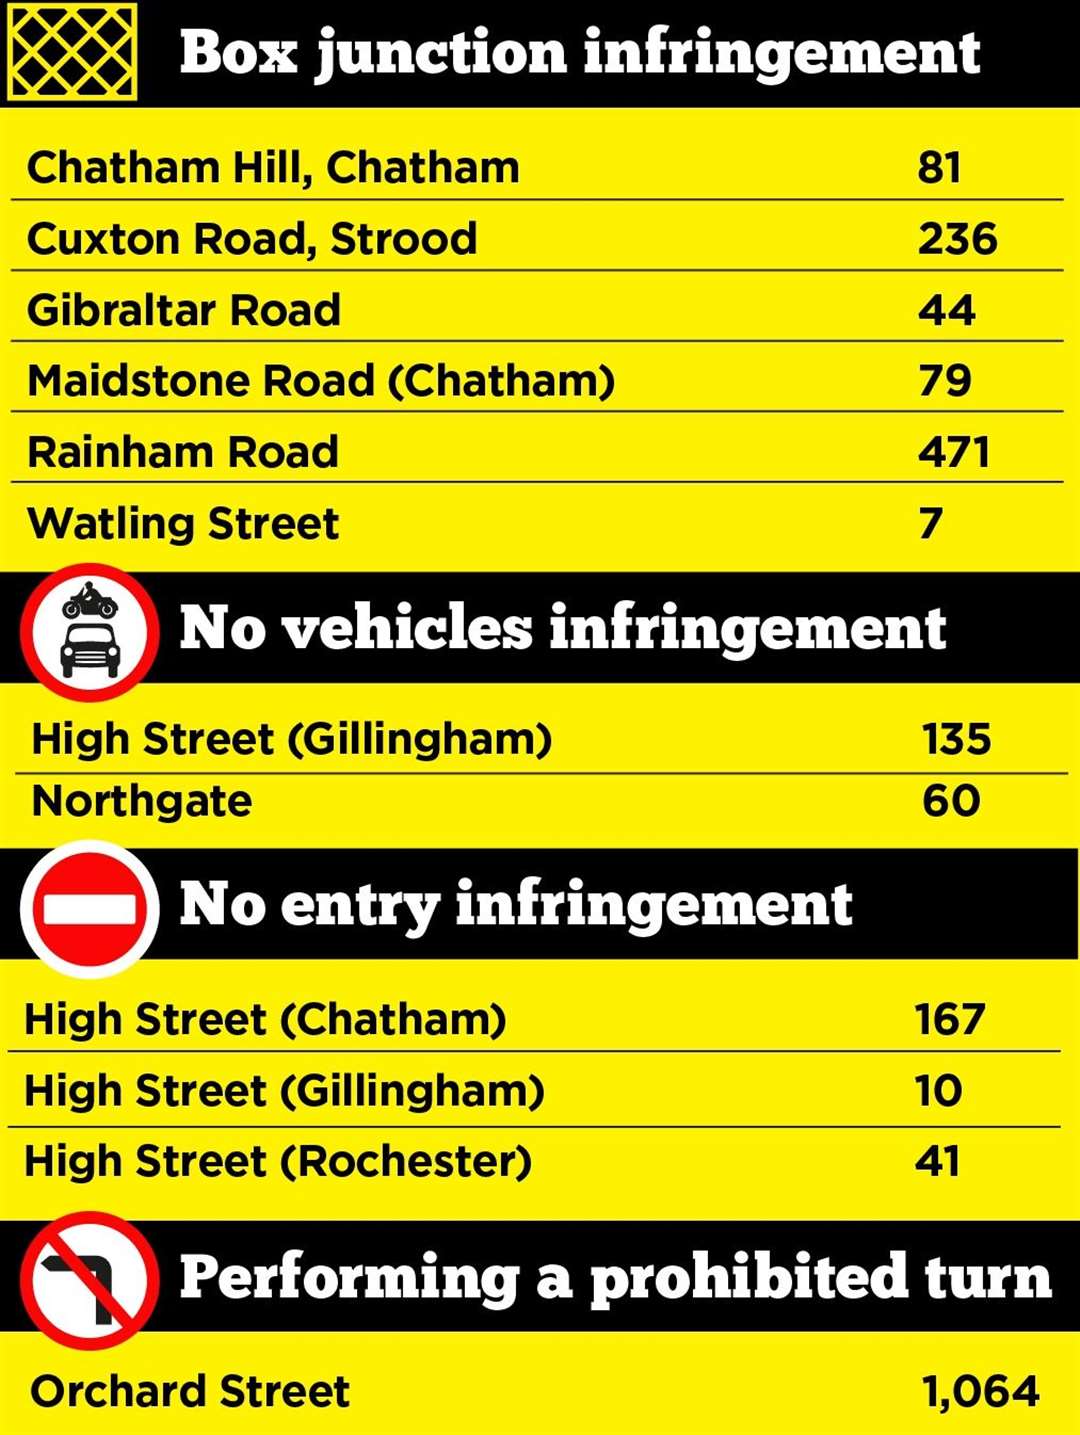 Motoring offenders caught by Medway council in February